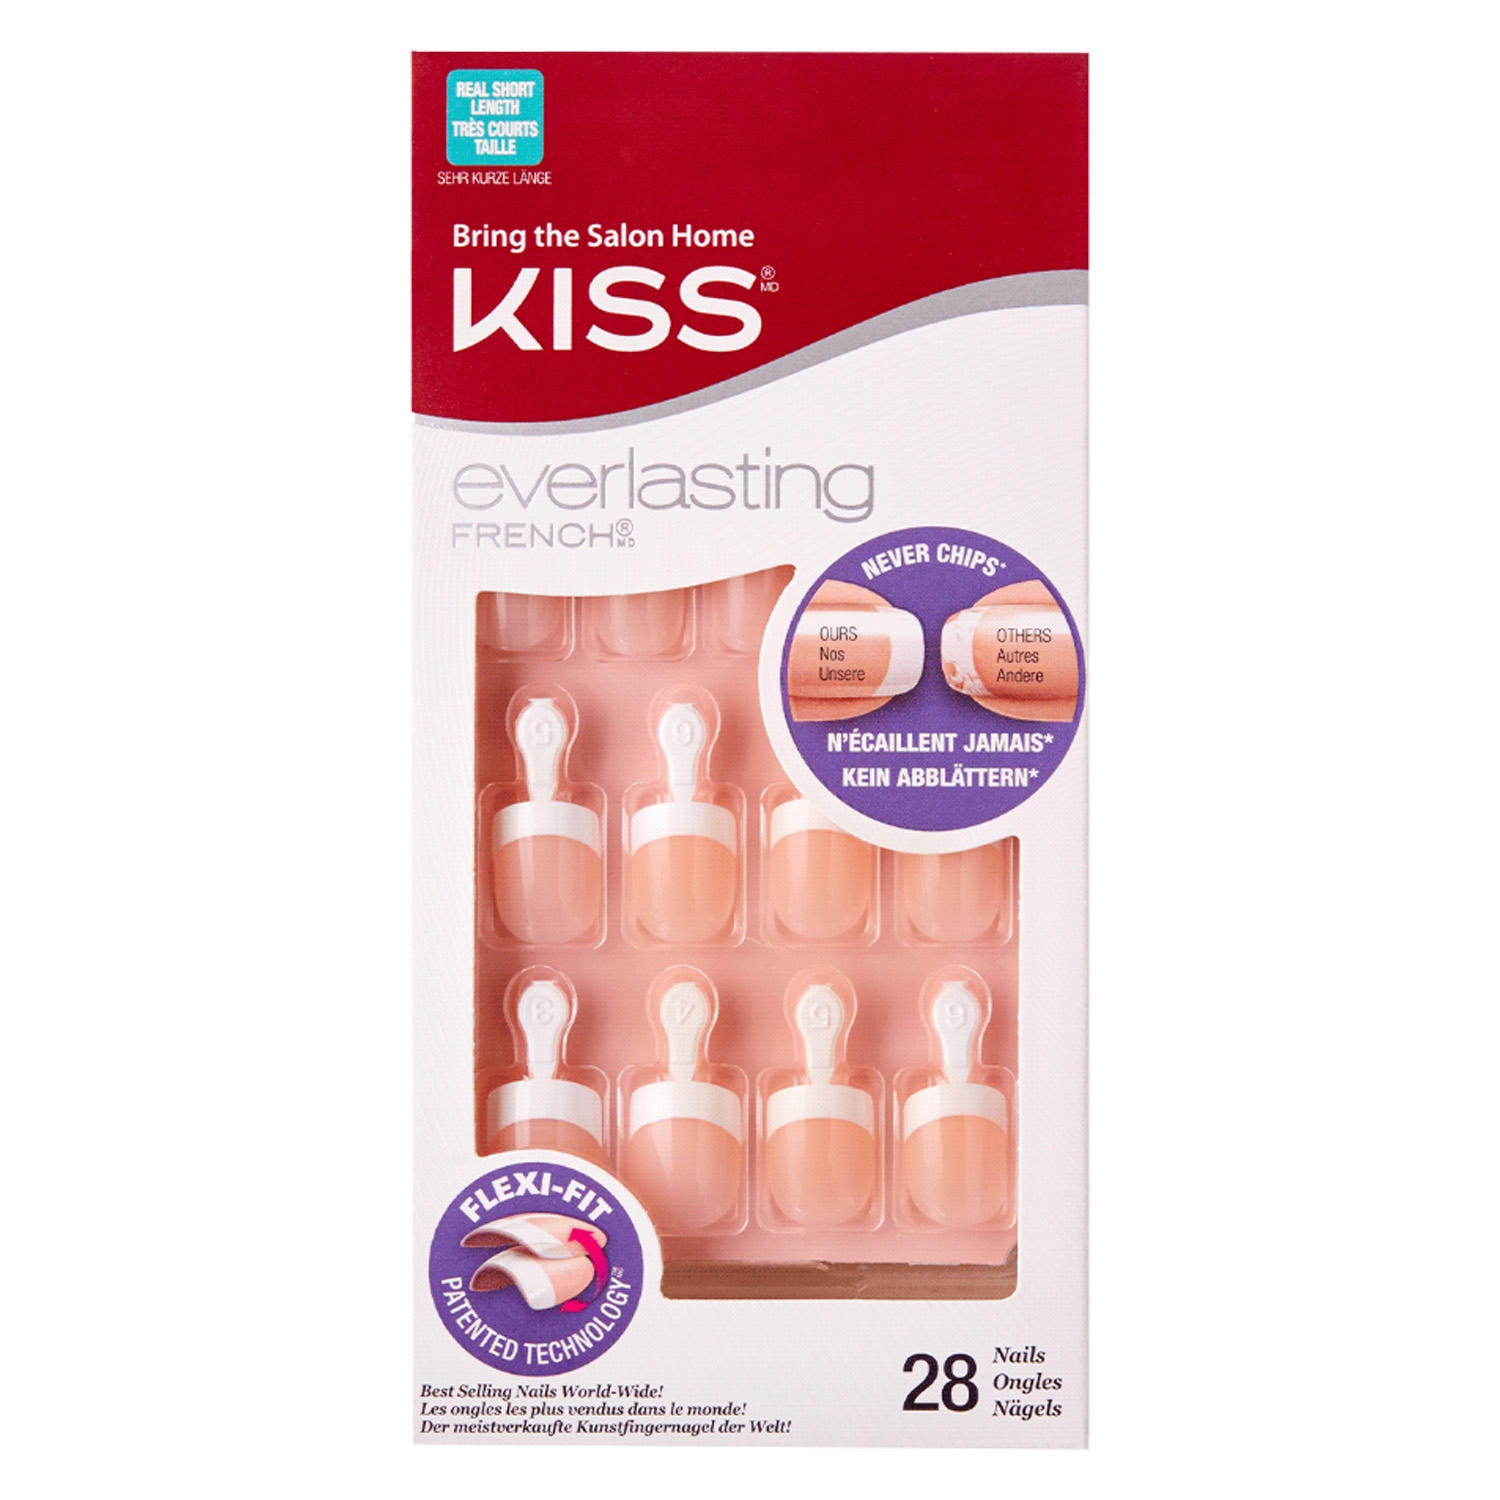 Product image from KISS Nails - Everlasting French Nail Endless